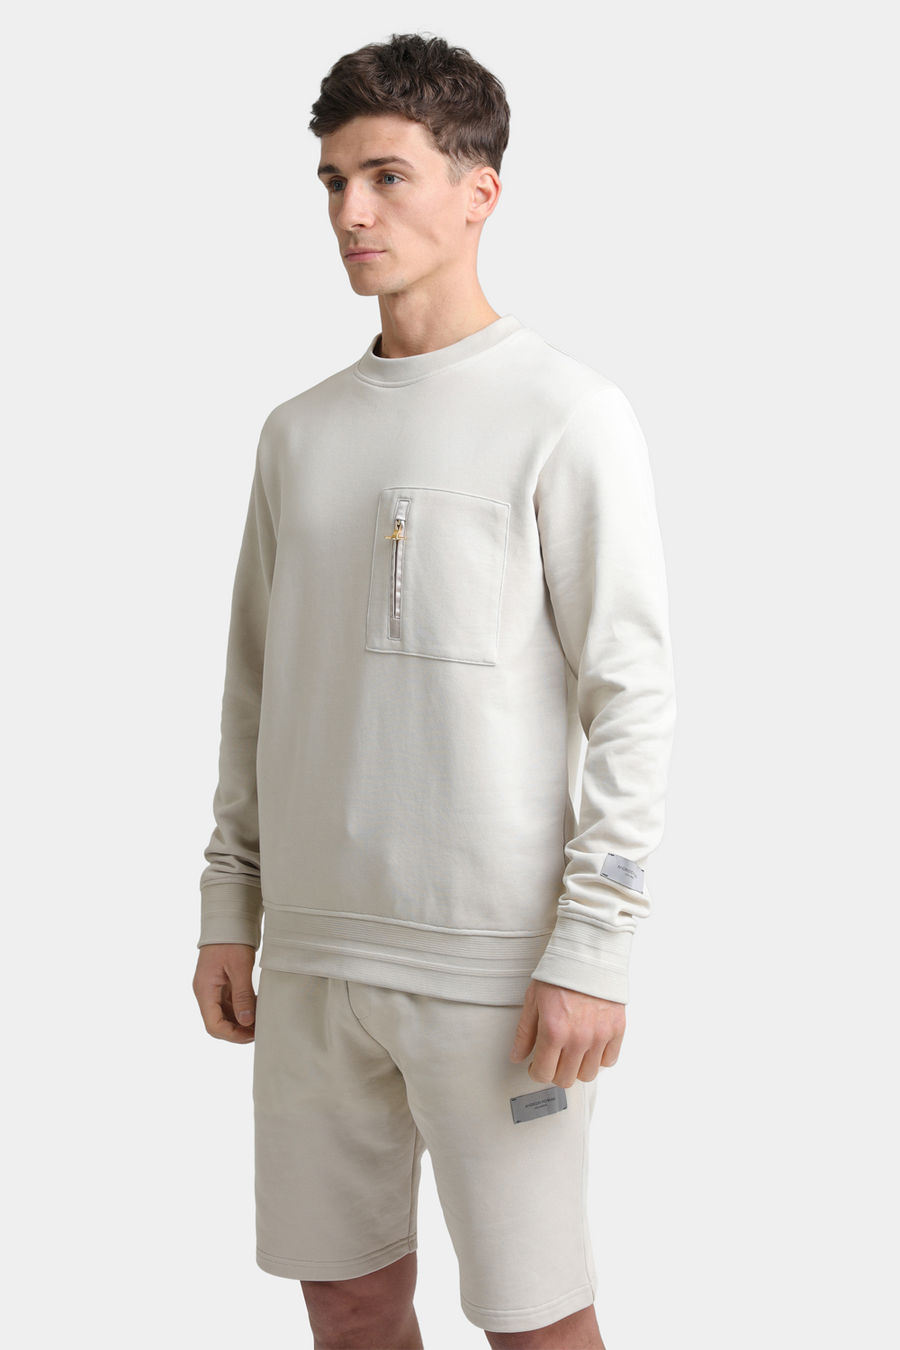 Buy the Android Homme Zip Pocket Crew Sweatshirt in Sand at Intro. Spend £100 for free UK delivery. Official stockists. We ship worldwide.